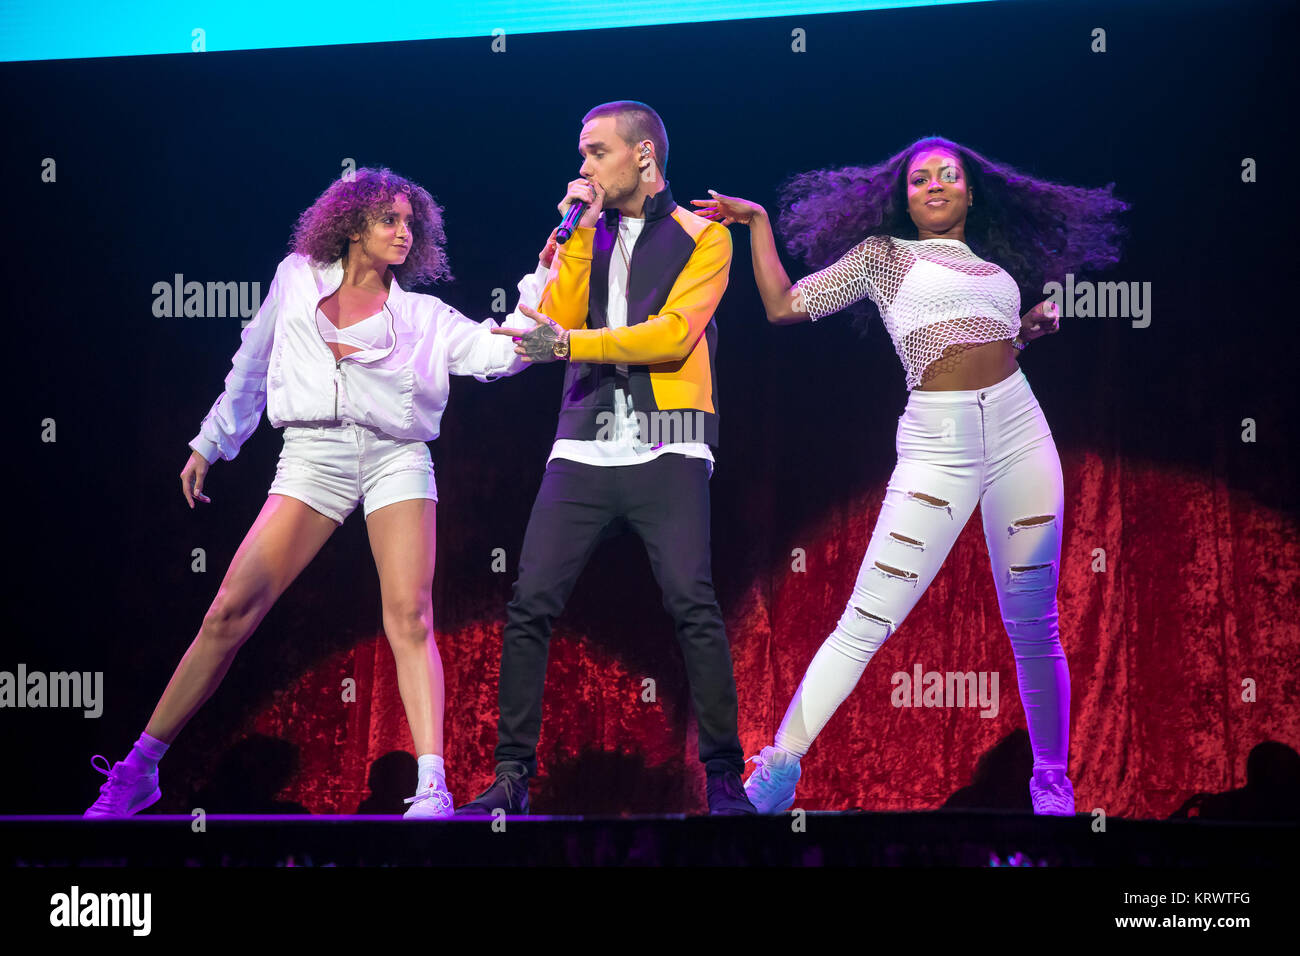 Liam Payne performing at 93.3 FLZ's iHeartRadio Jingle Ball on December 16, 2017 at Amalie Arena in Tampa, Florida. Stock Photo